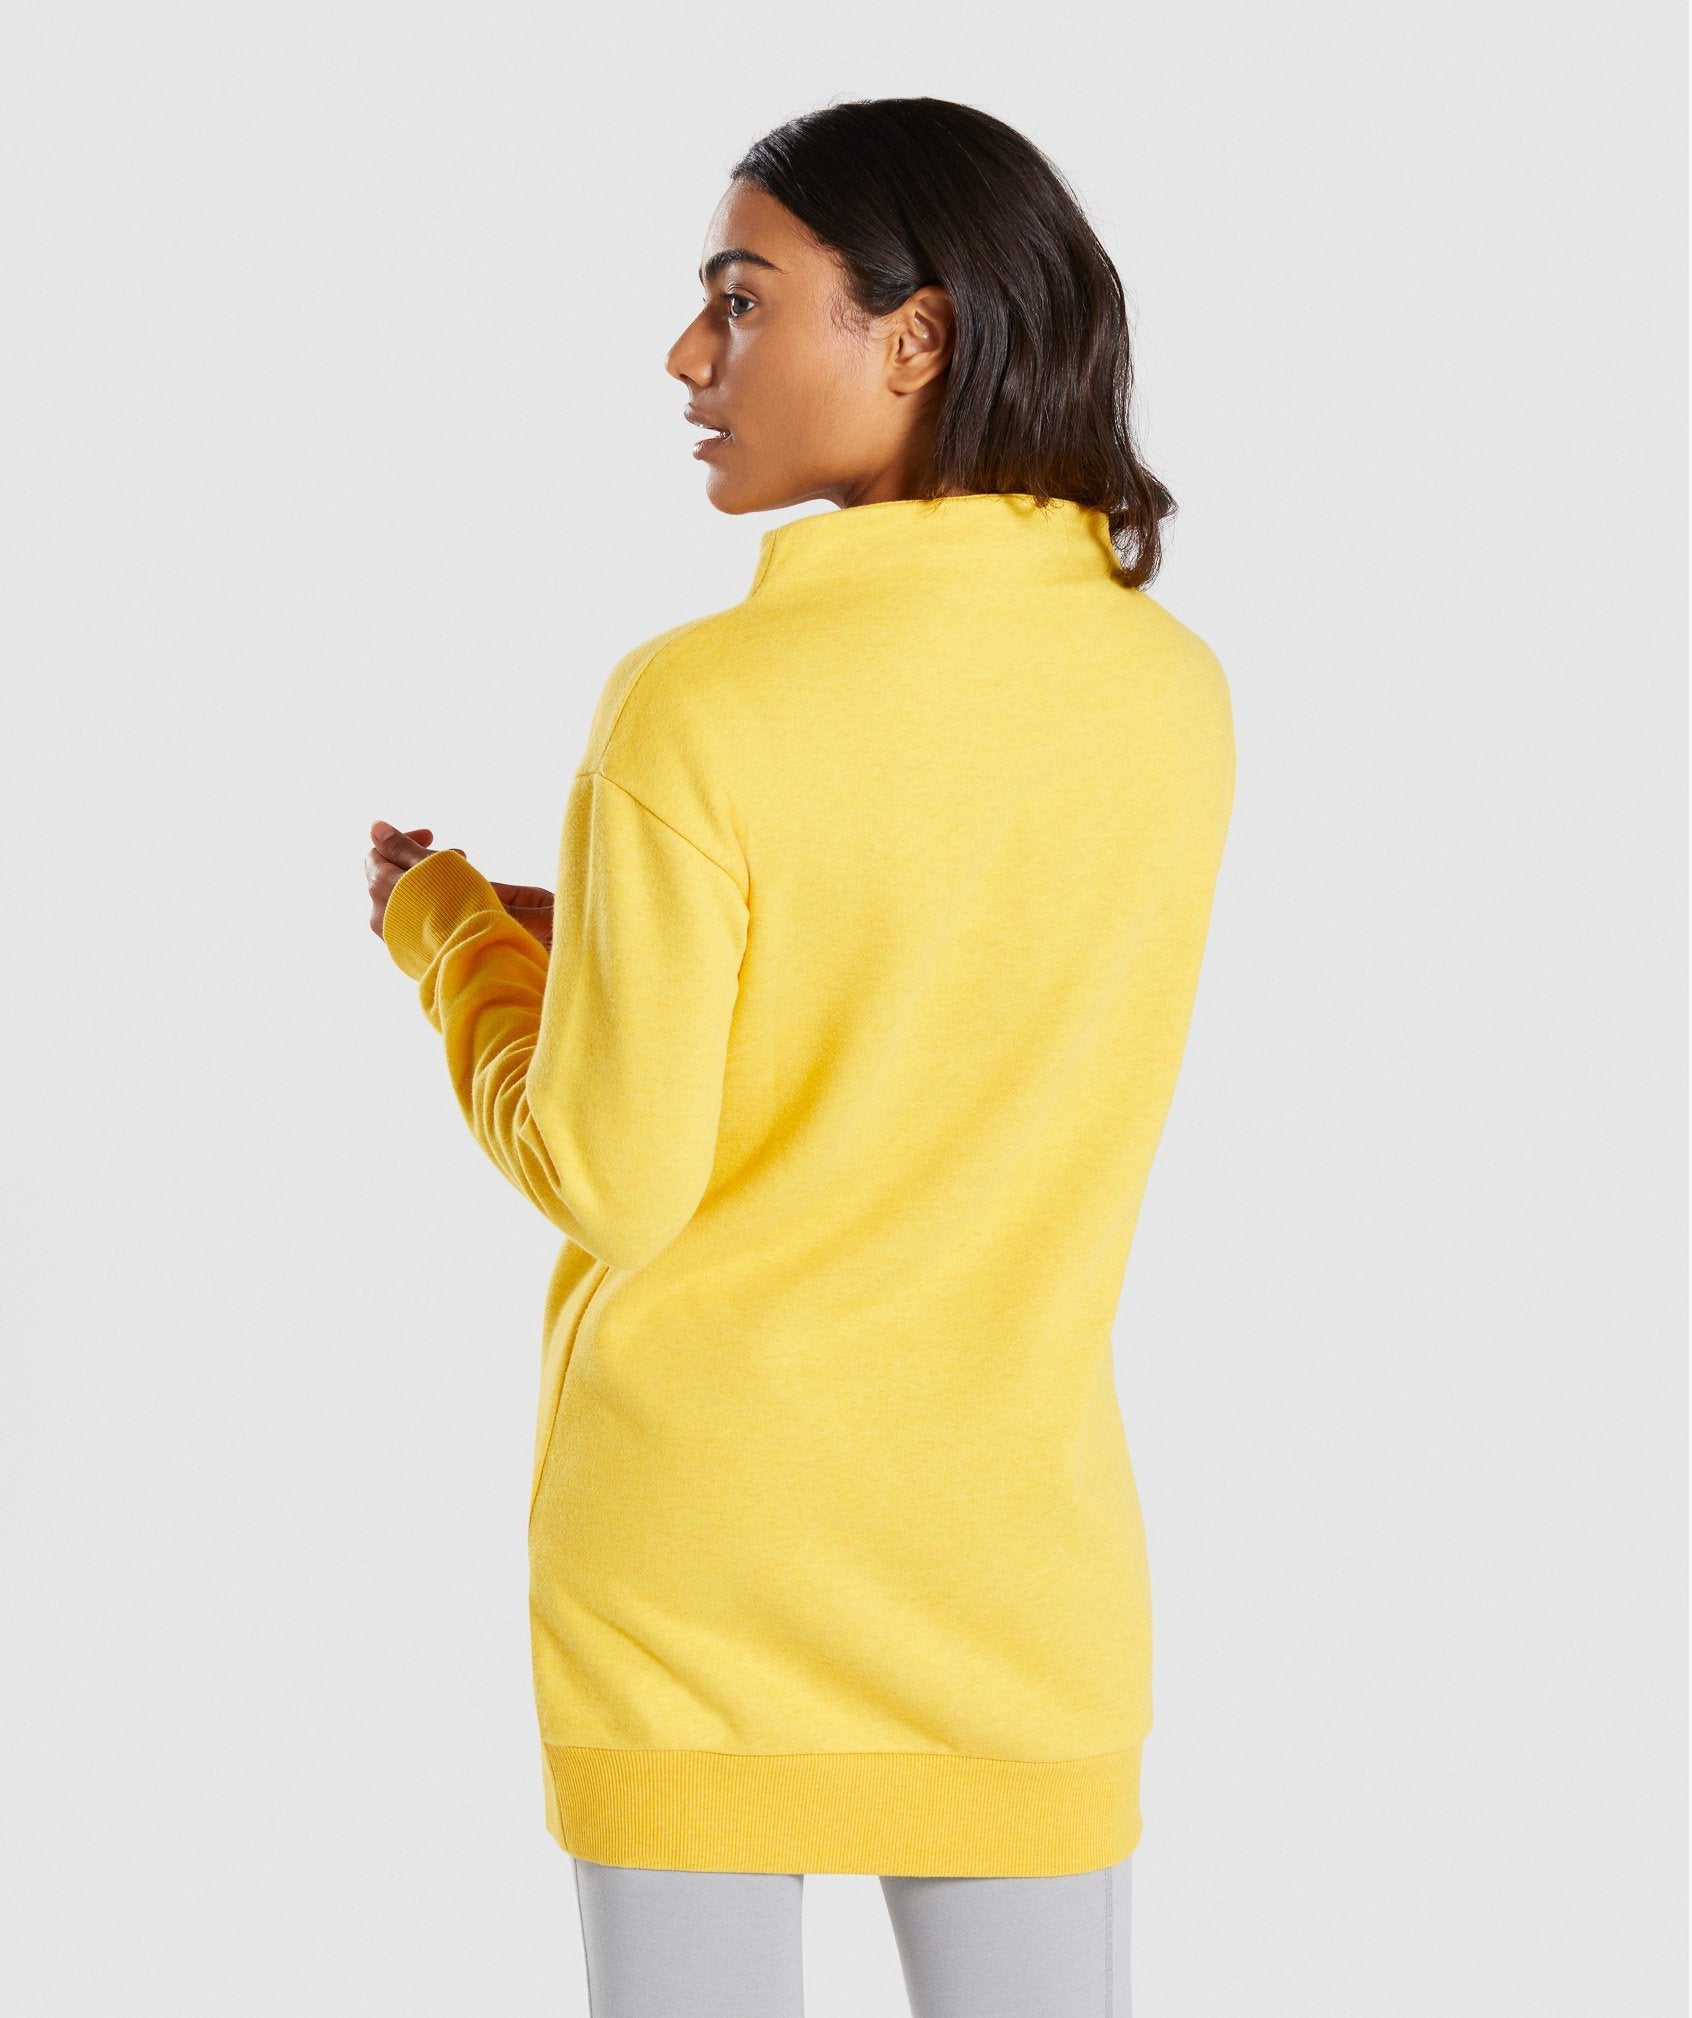 So Soft Sweater in Citrus Yellow Marl - view 2